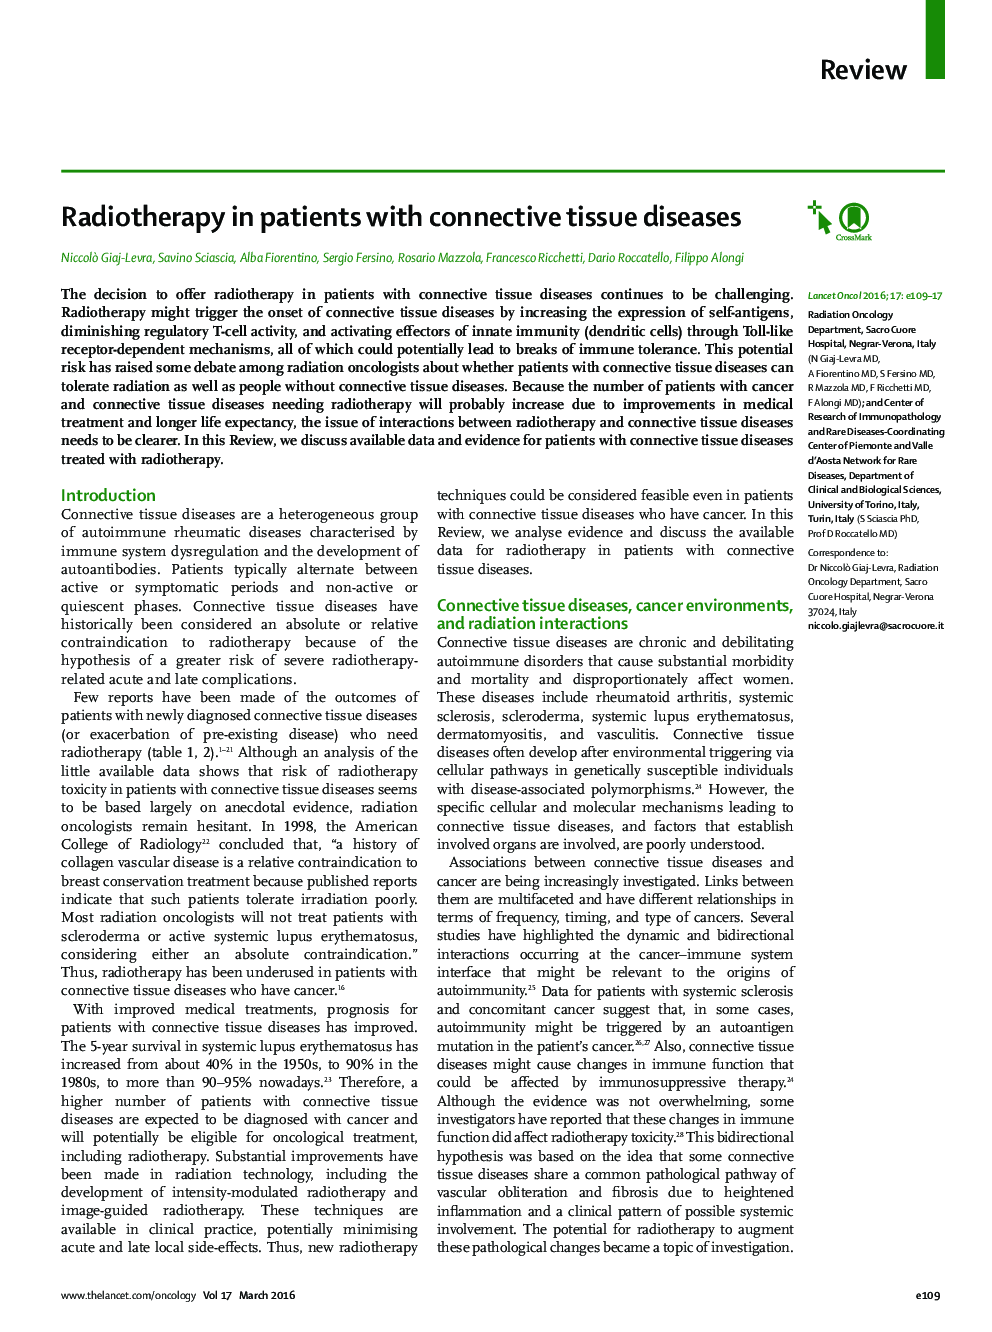 Radiotherapy in patients with connective tissue diseases